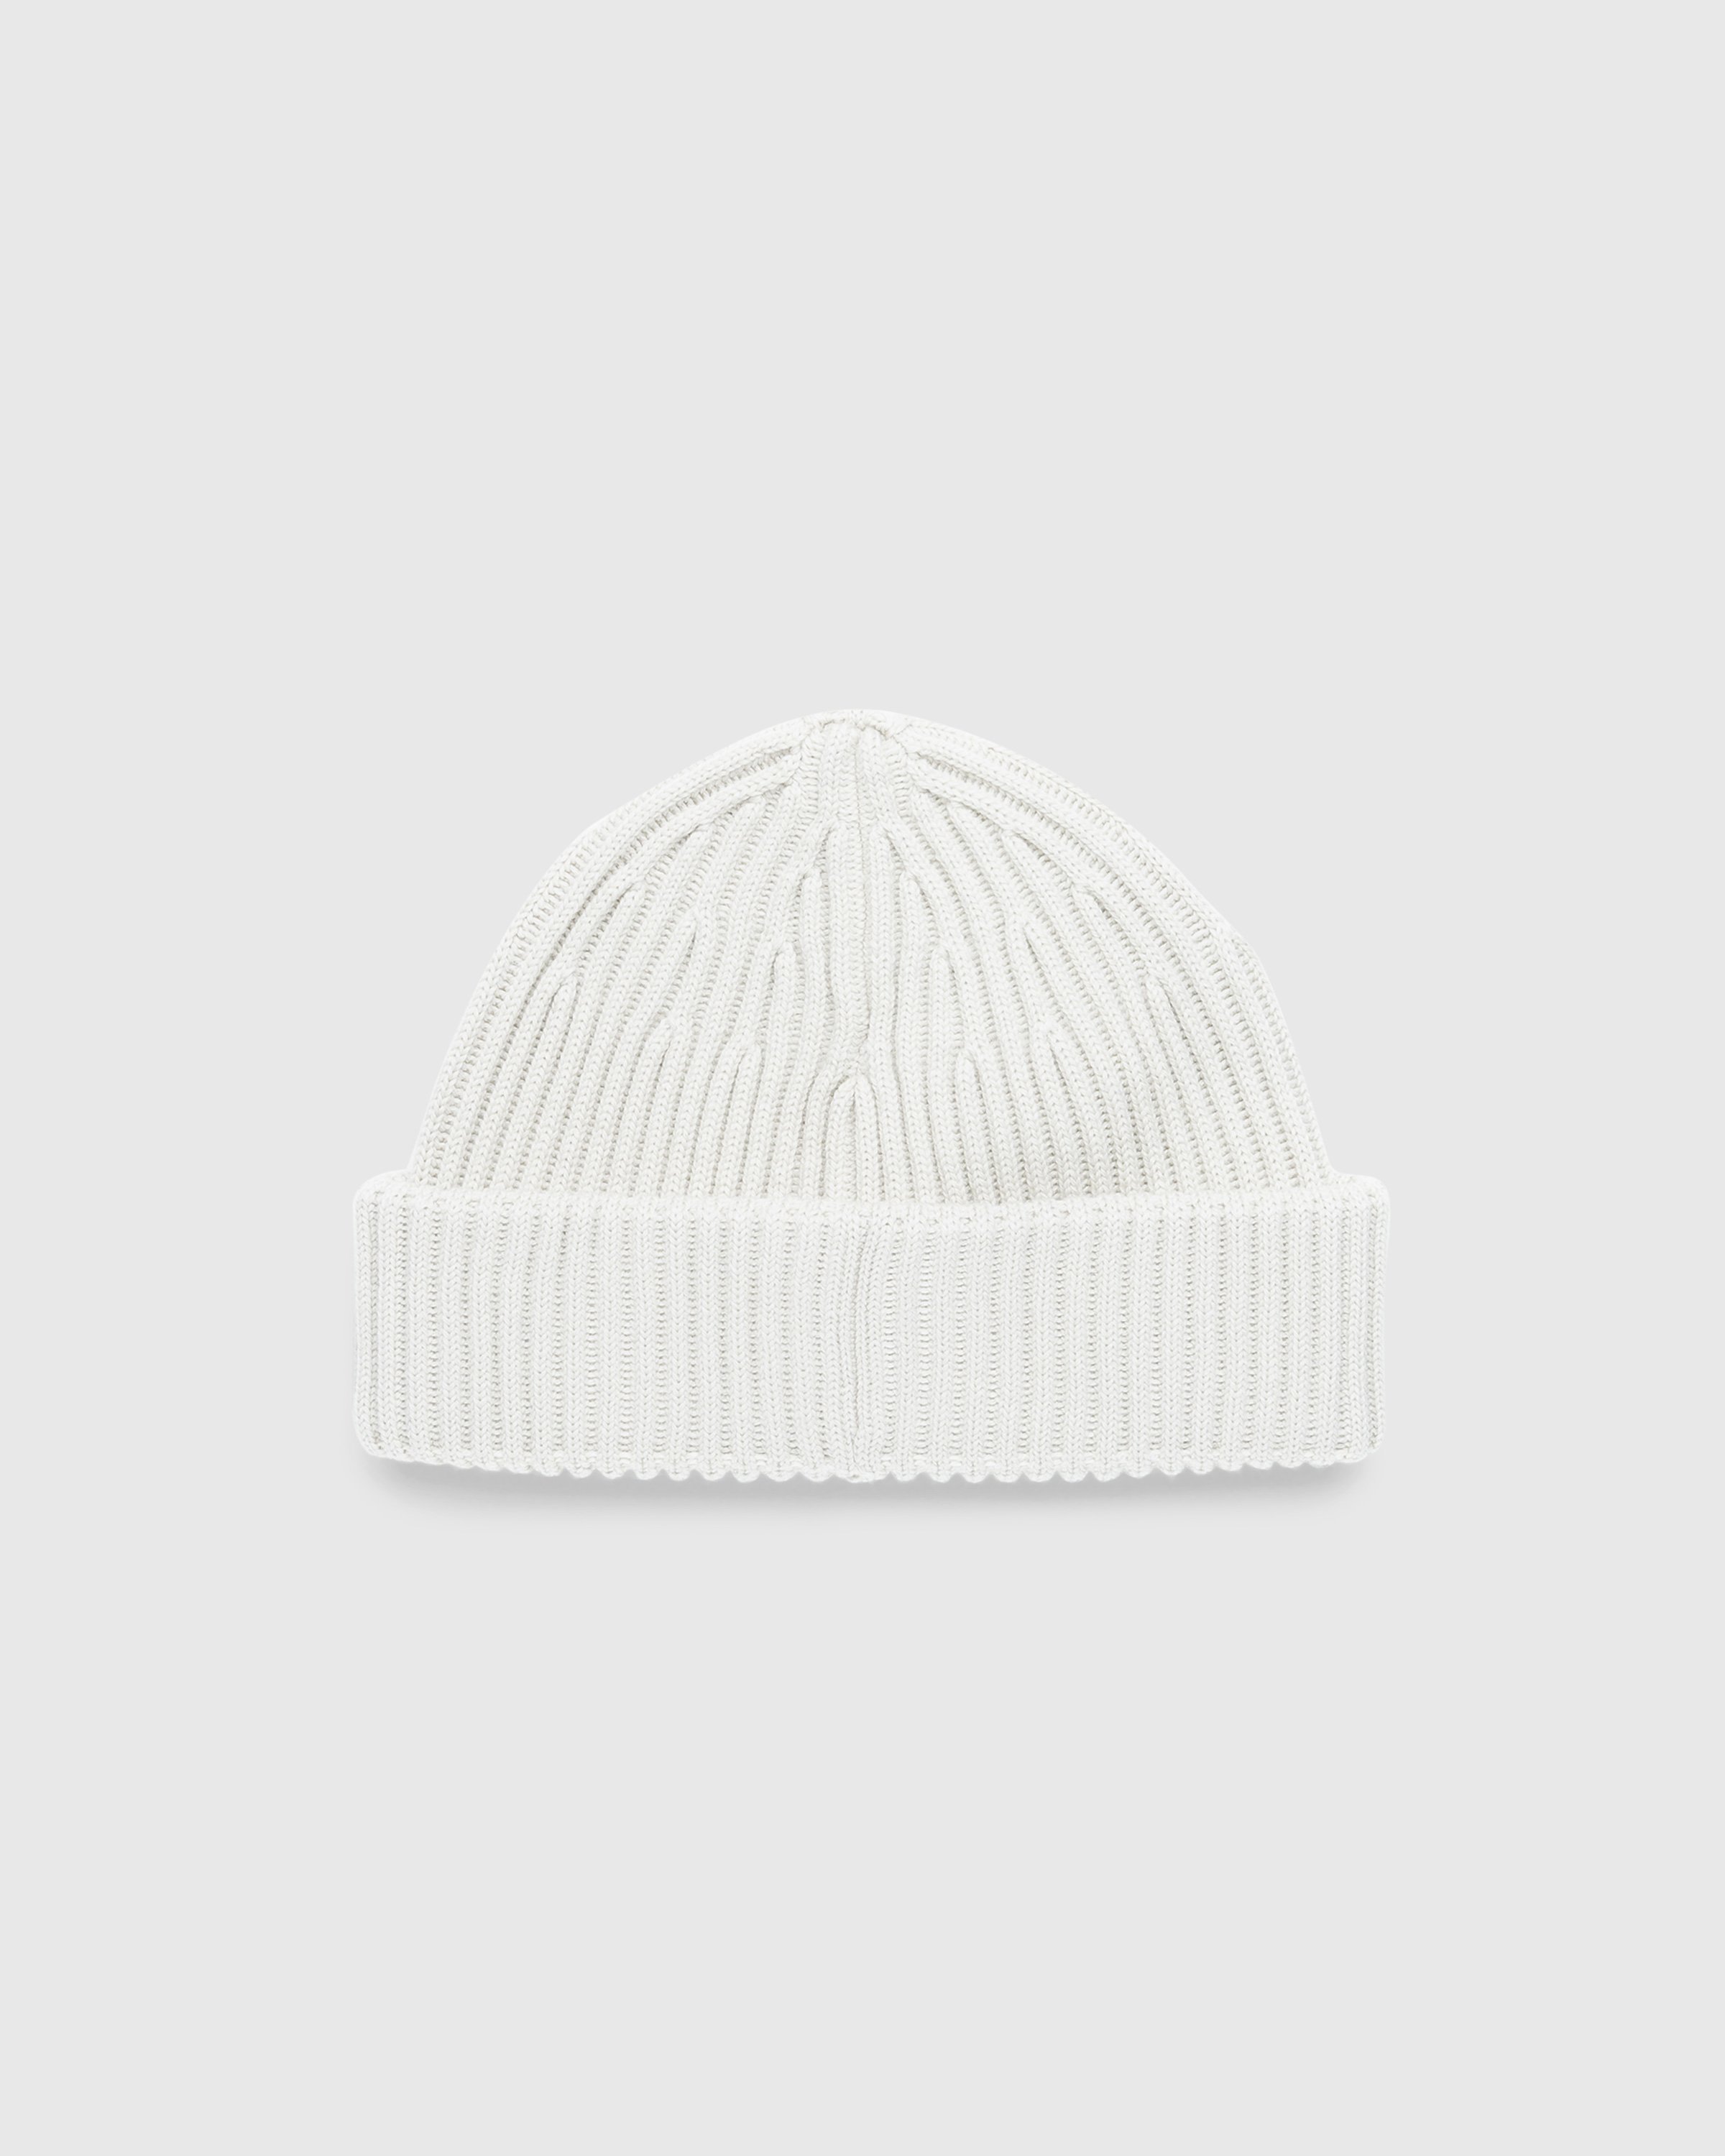 Stone Island - Ribbed Wool Beanie Plaster - Accessories - White - Image 2